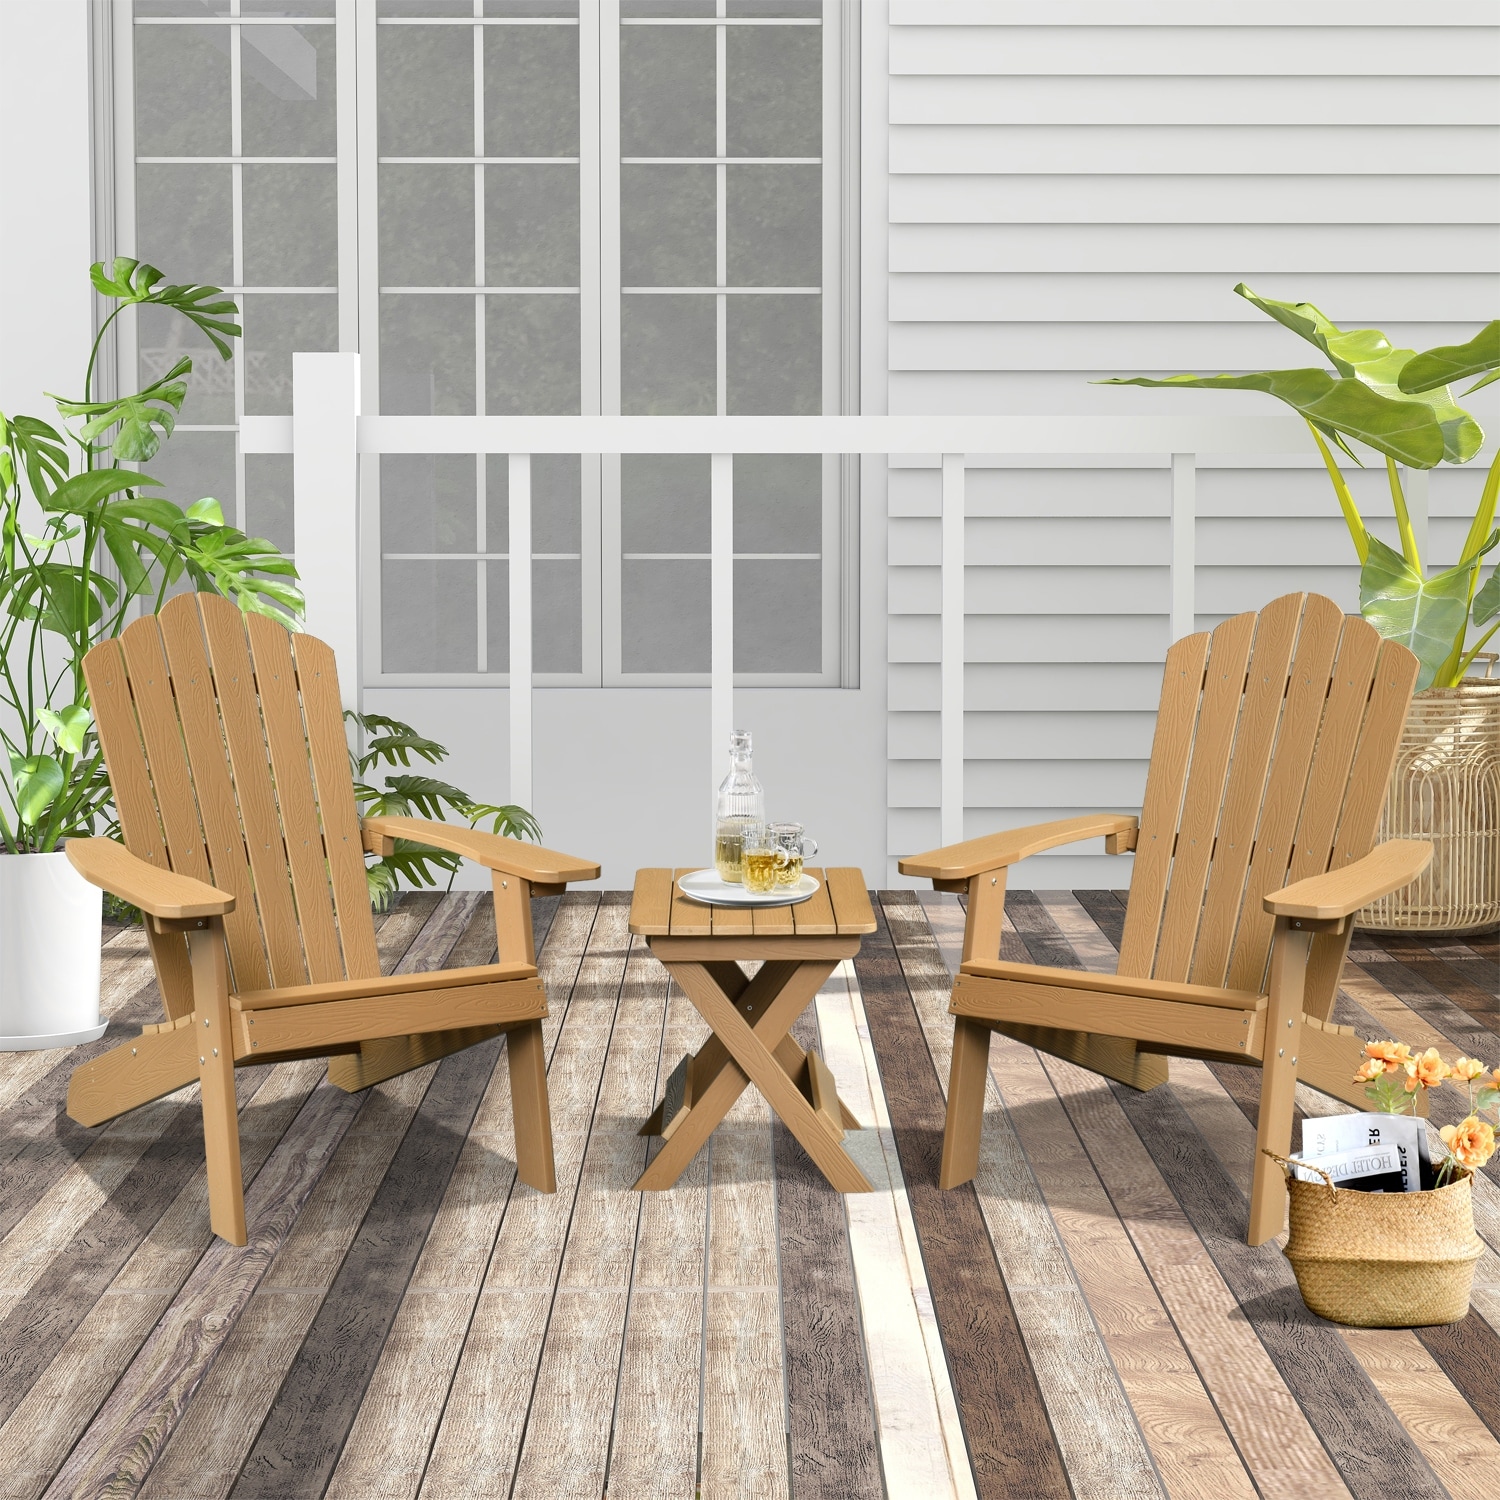 Ovios 3 Pieces Plastic Wood Adirondack Outdoor Patio Chair Side Table